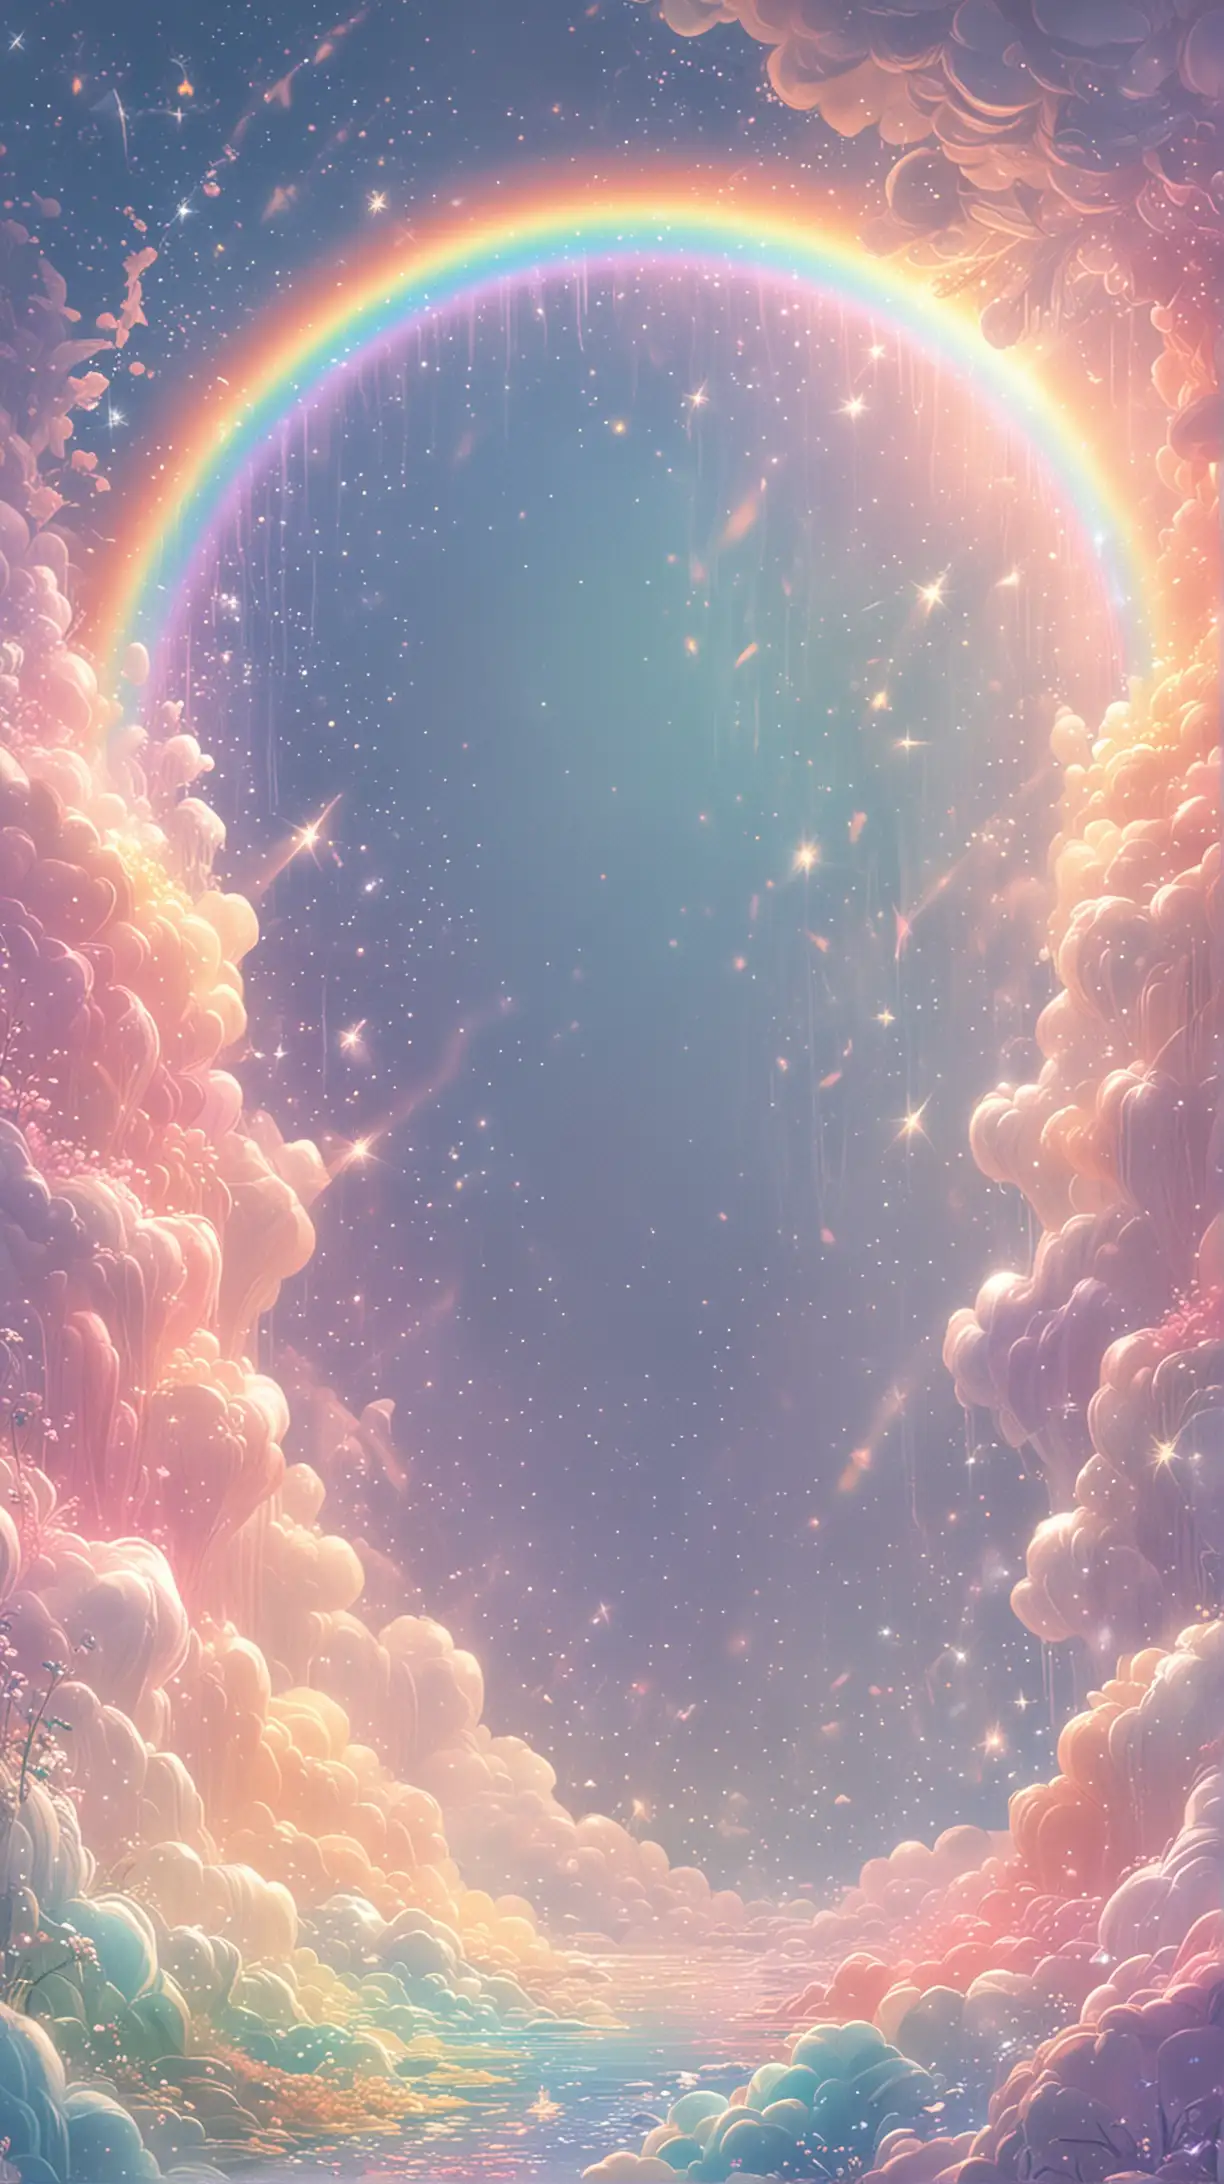 Ethereal Rainbow Sky with Sparkling Transcendence